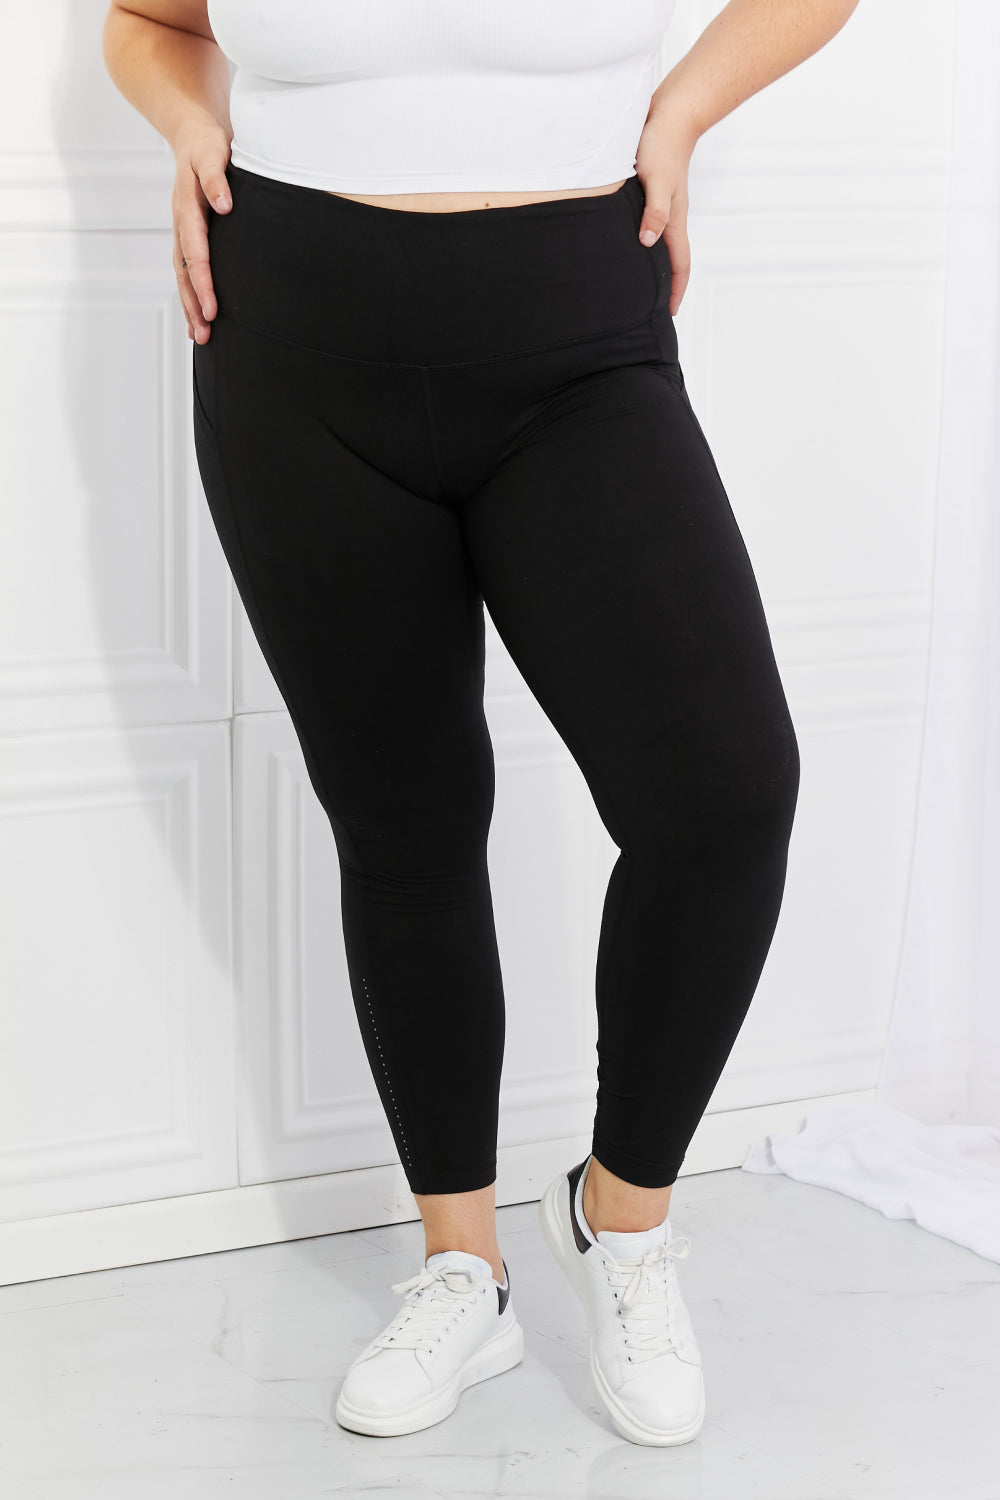 Reflective Dot Leggings with Pockets